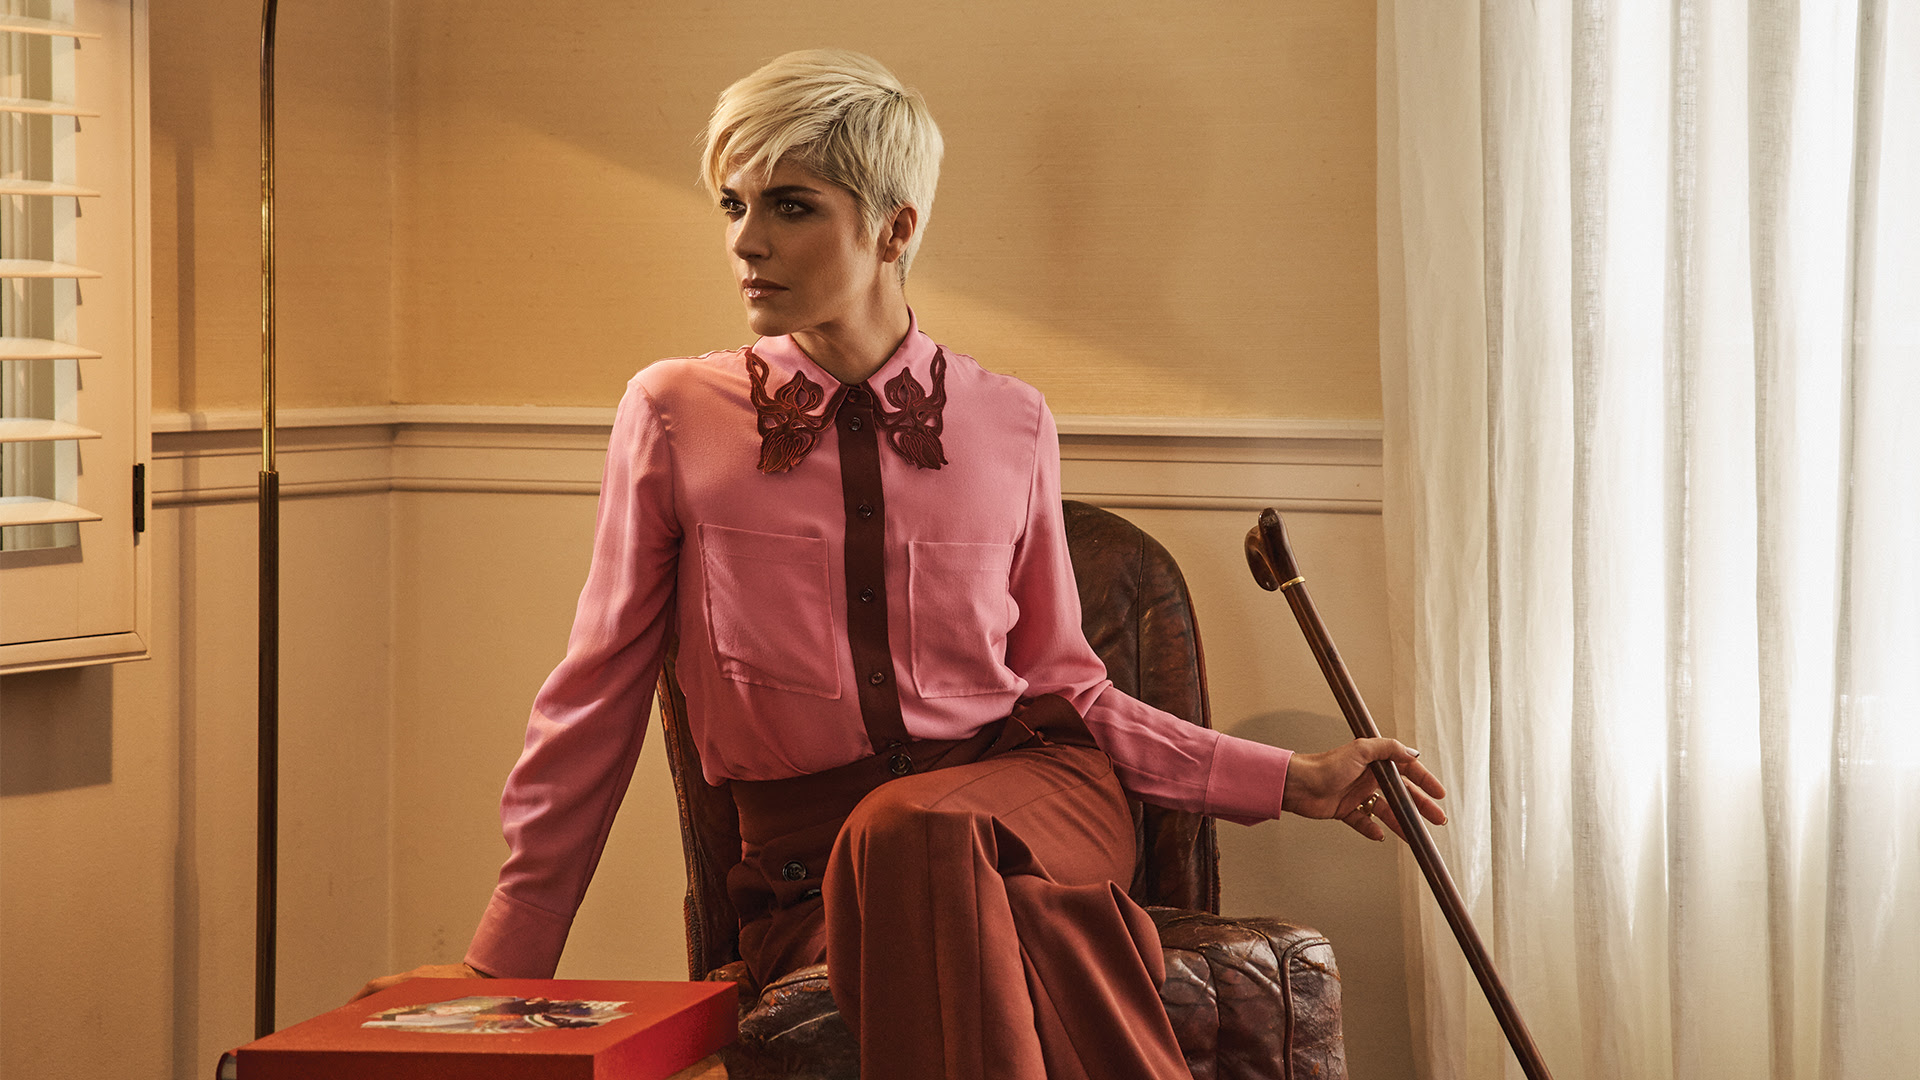 Selma Blair, a woman with short blonde hair sits on a chair with her walking cane in one hand. She is dressed in purple and red